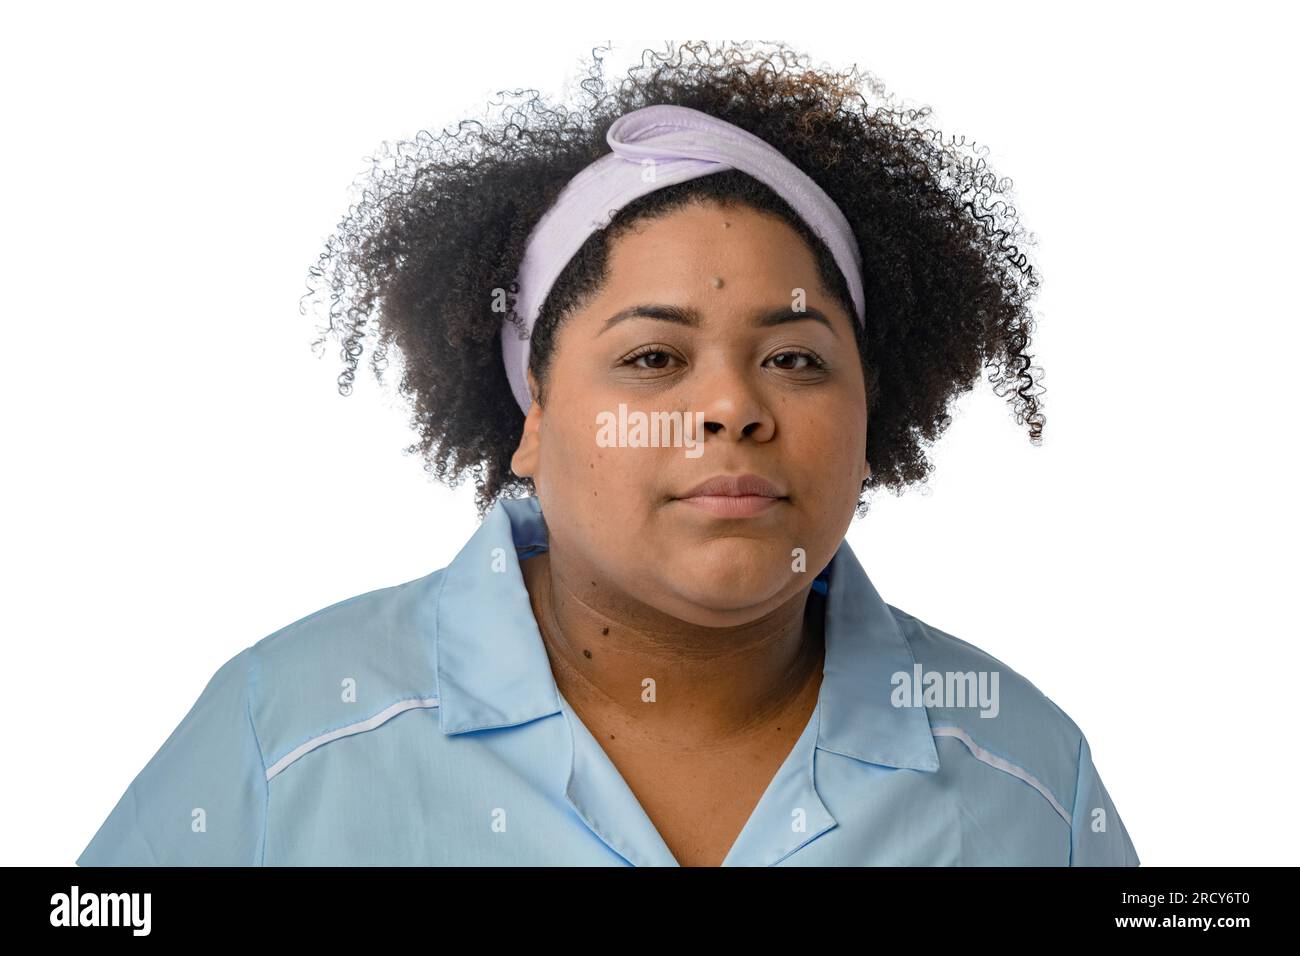 portrait of brunette woman with a head band for facial cleansing wear blue uniform and looking at the camera seriously. white background - copy space. Stock Photo